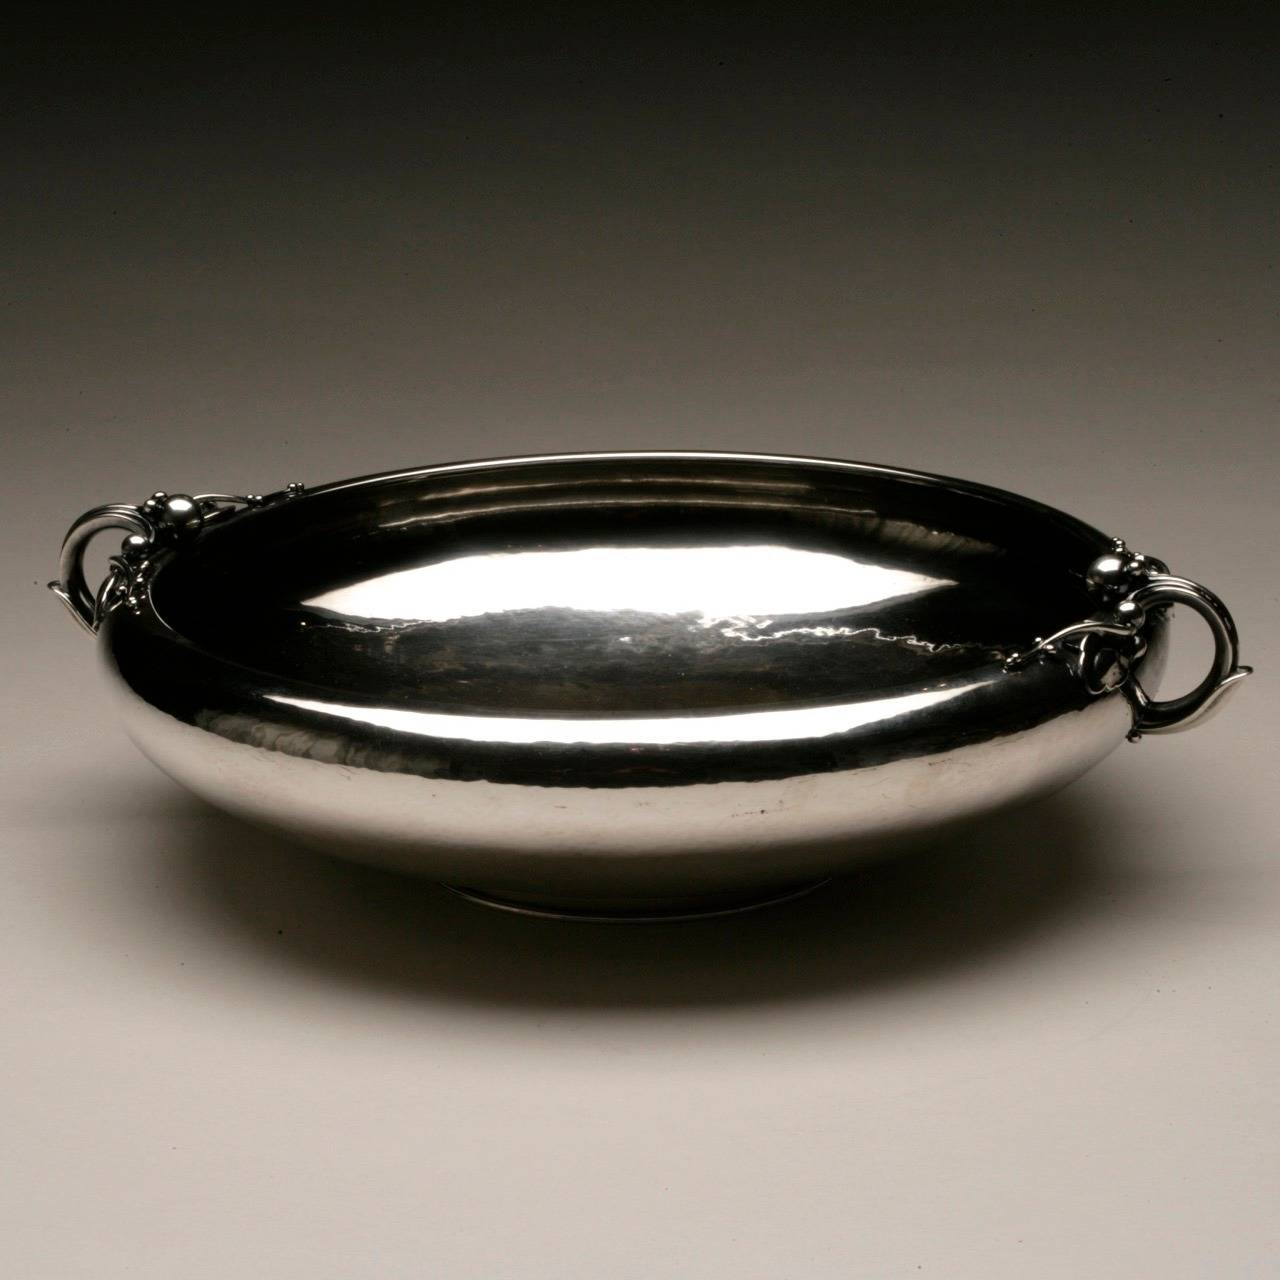 Georg Jensen large centerpiece bowl No. 625B.

Exceptional, large, two handled centerpiece bowl with exquisite detail of leaf and pod in stem. Heavy, sterling silver with lightly hammered surface.

This was Georg Jensen's last design.

Georg